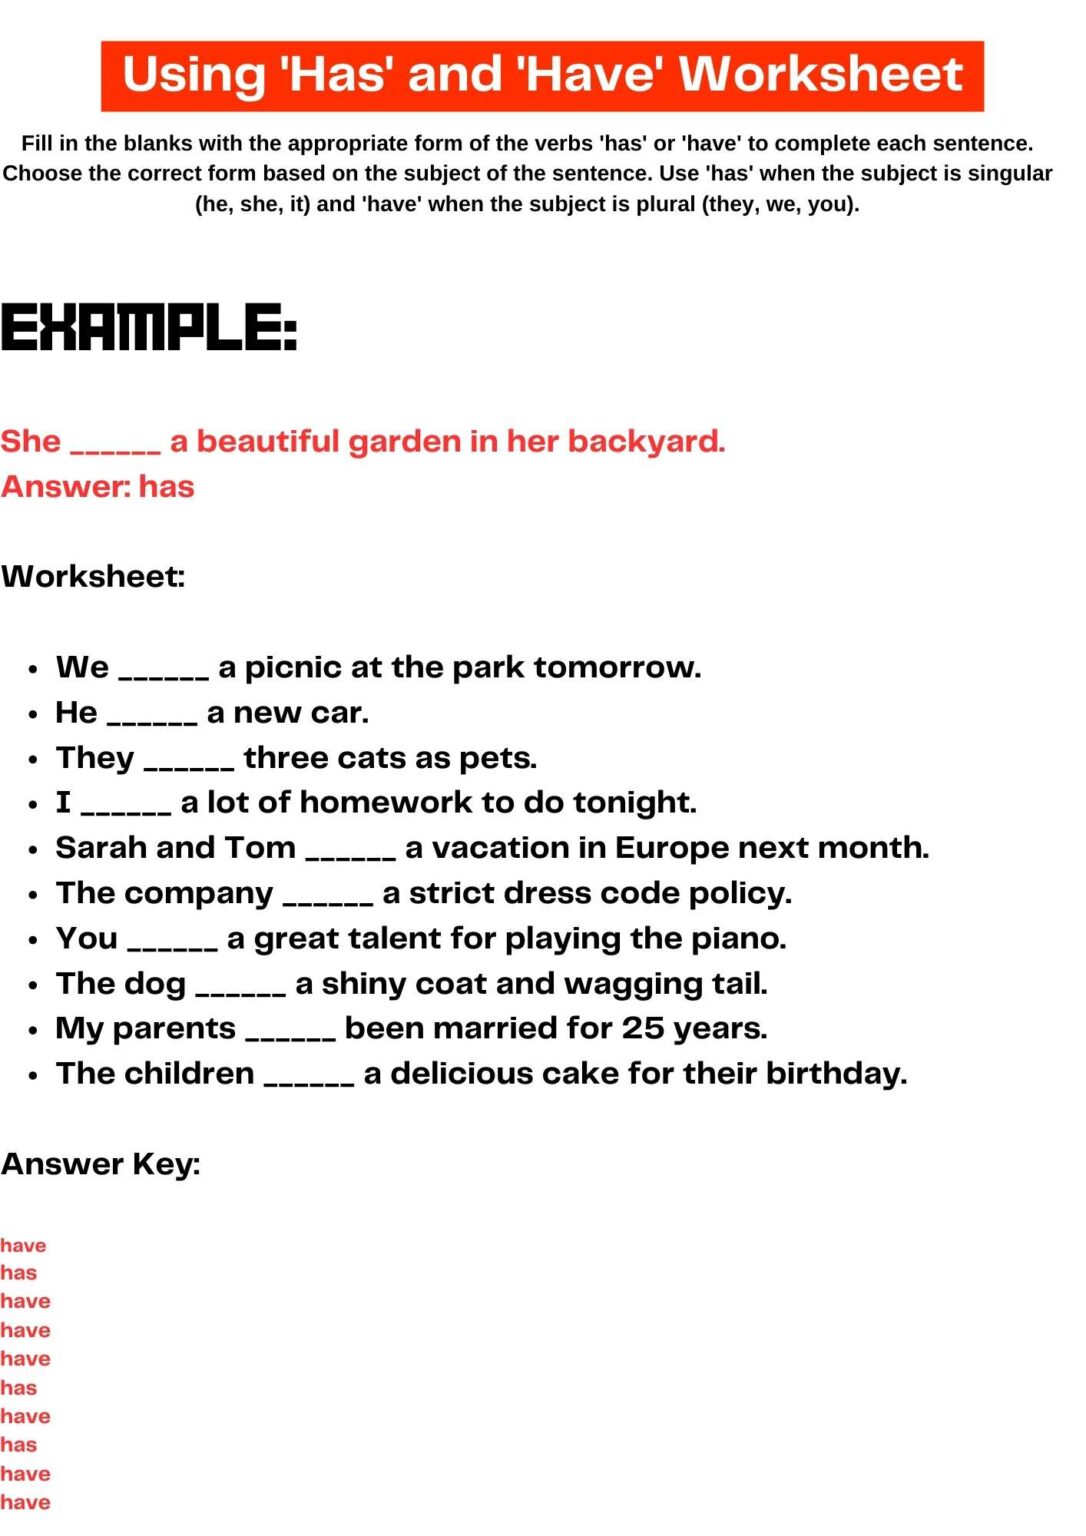 use-of-has-and-have-worksheet-with-example